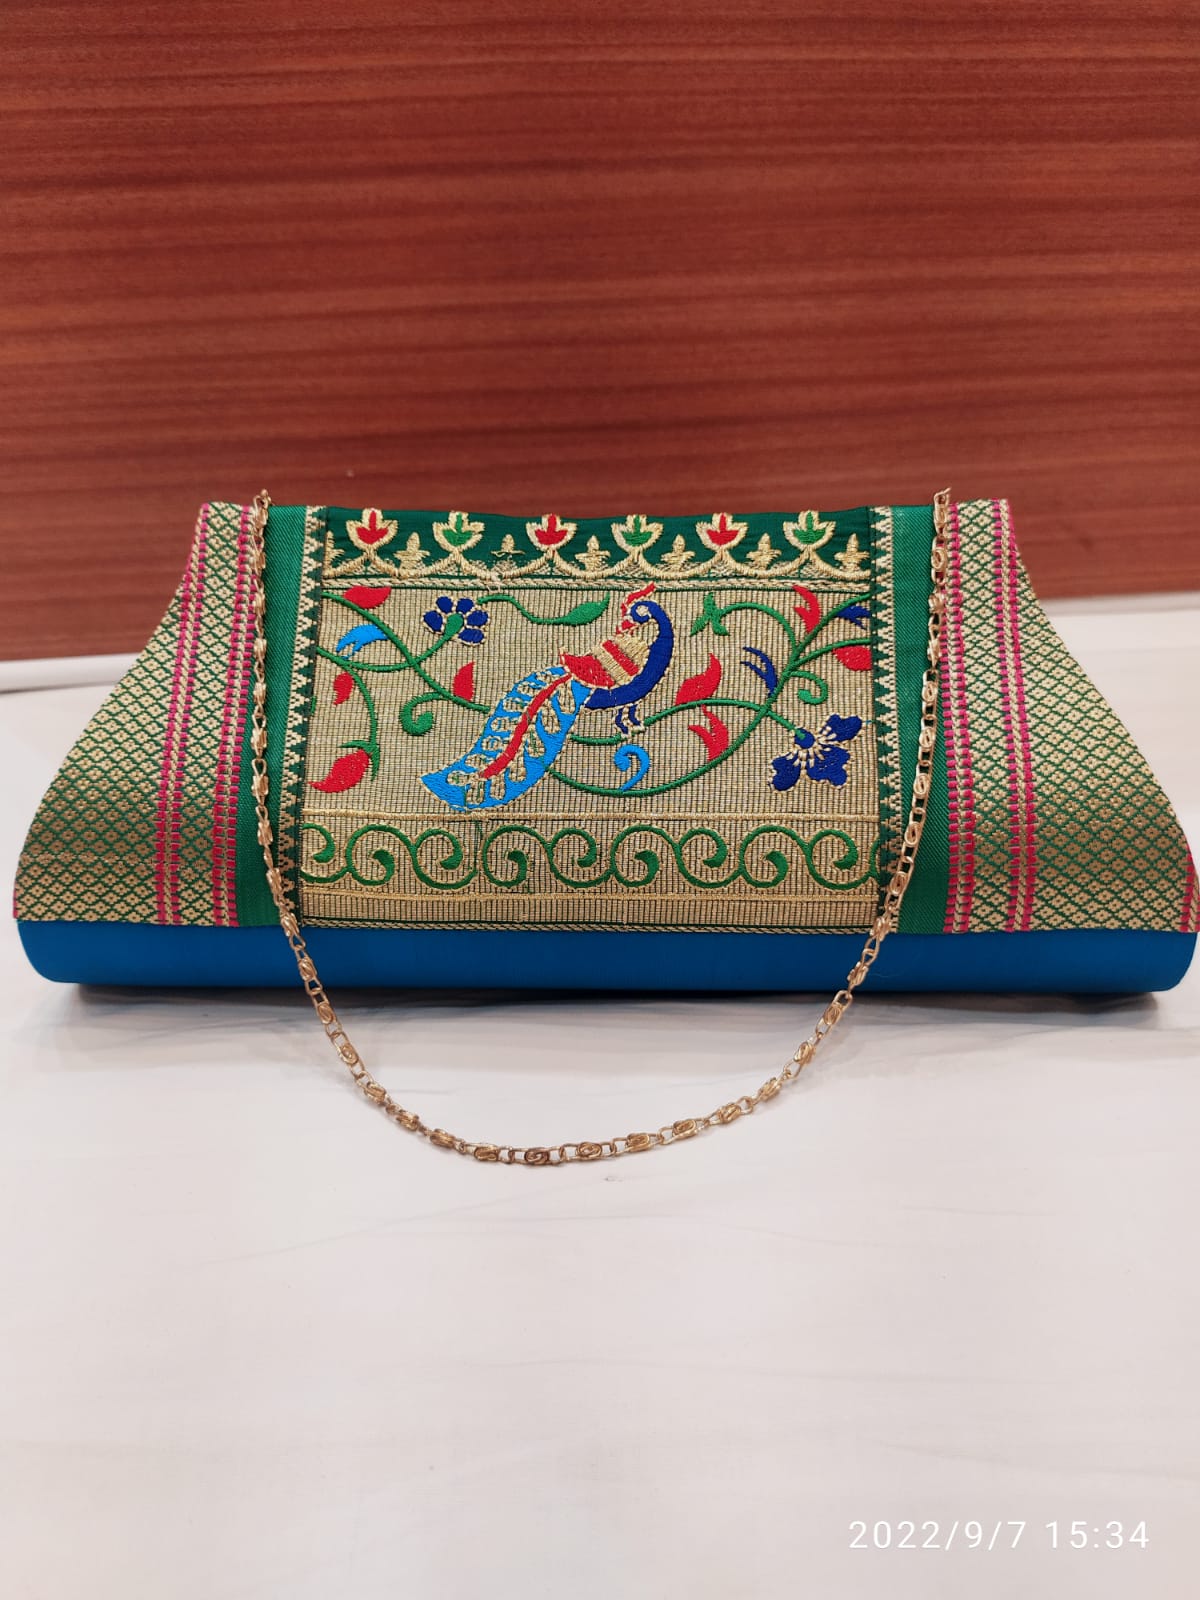 Buy Sukriti Green Peacock Mosaic Pattern Genuine Leather Crossbody Bag with  Pouch, Essential Minimalist Crossbody Bag, Utility Zipper Crossbody Bag,  Classic Shoulder Bag at ShopLC.